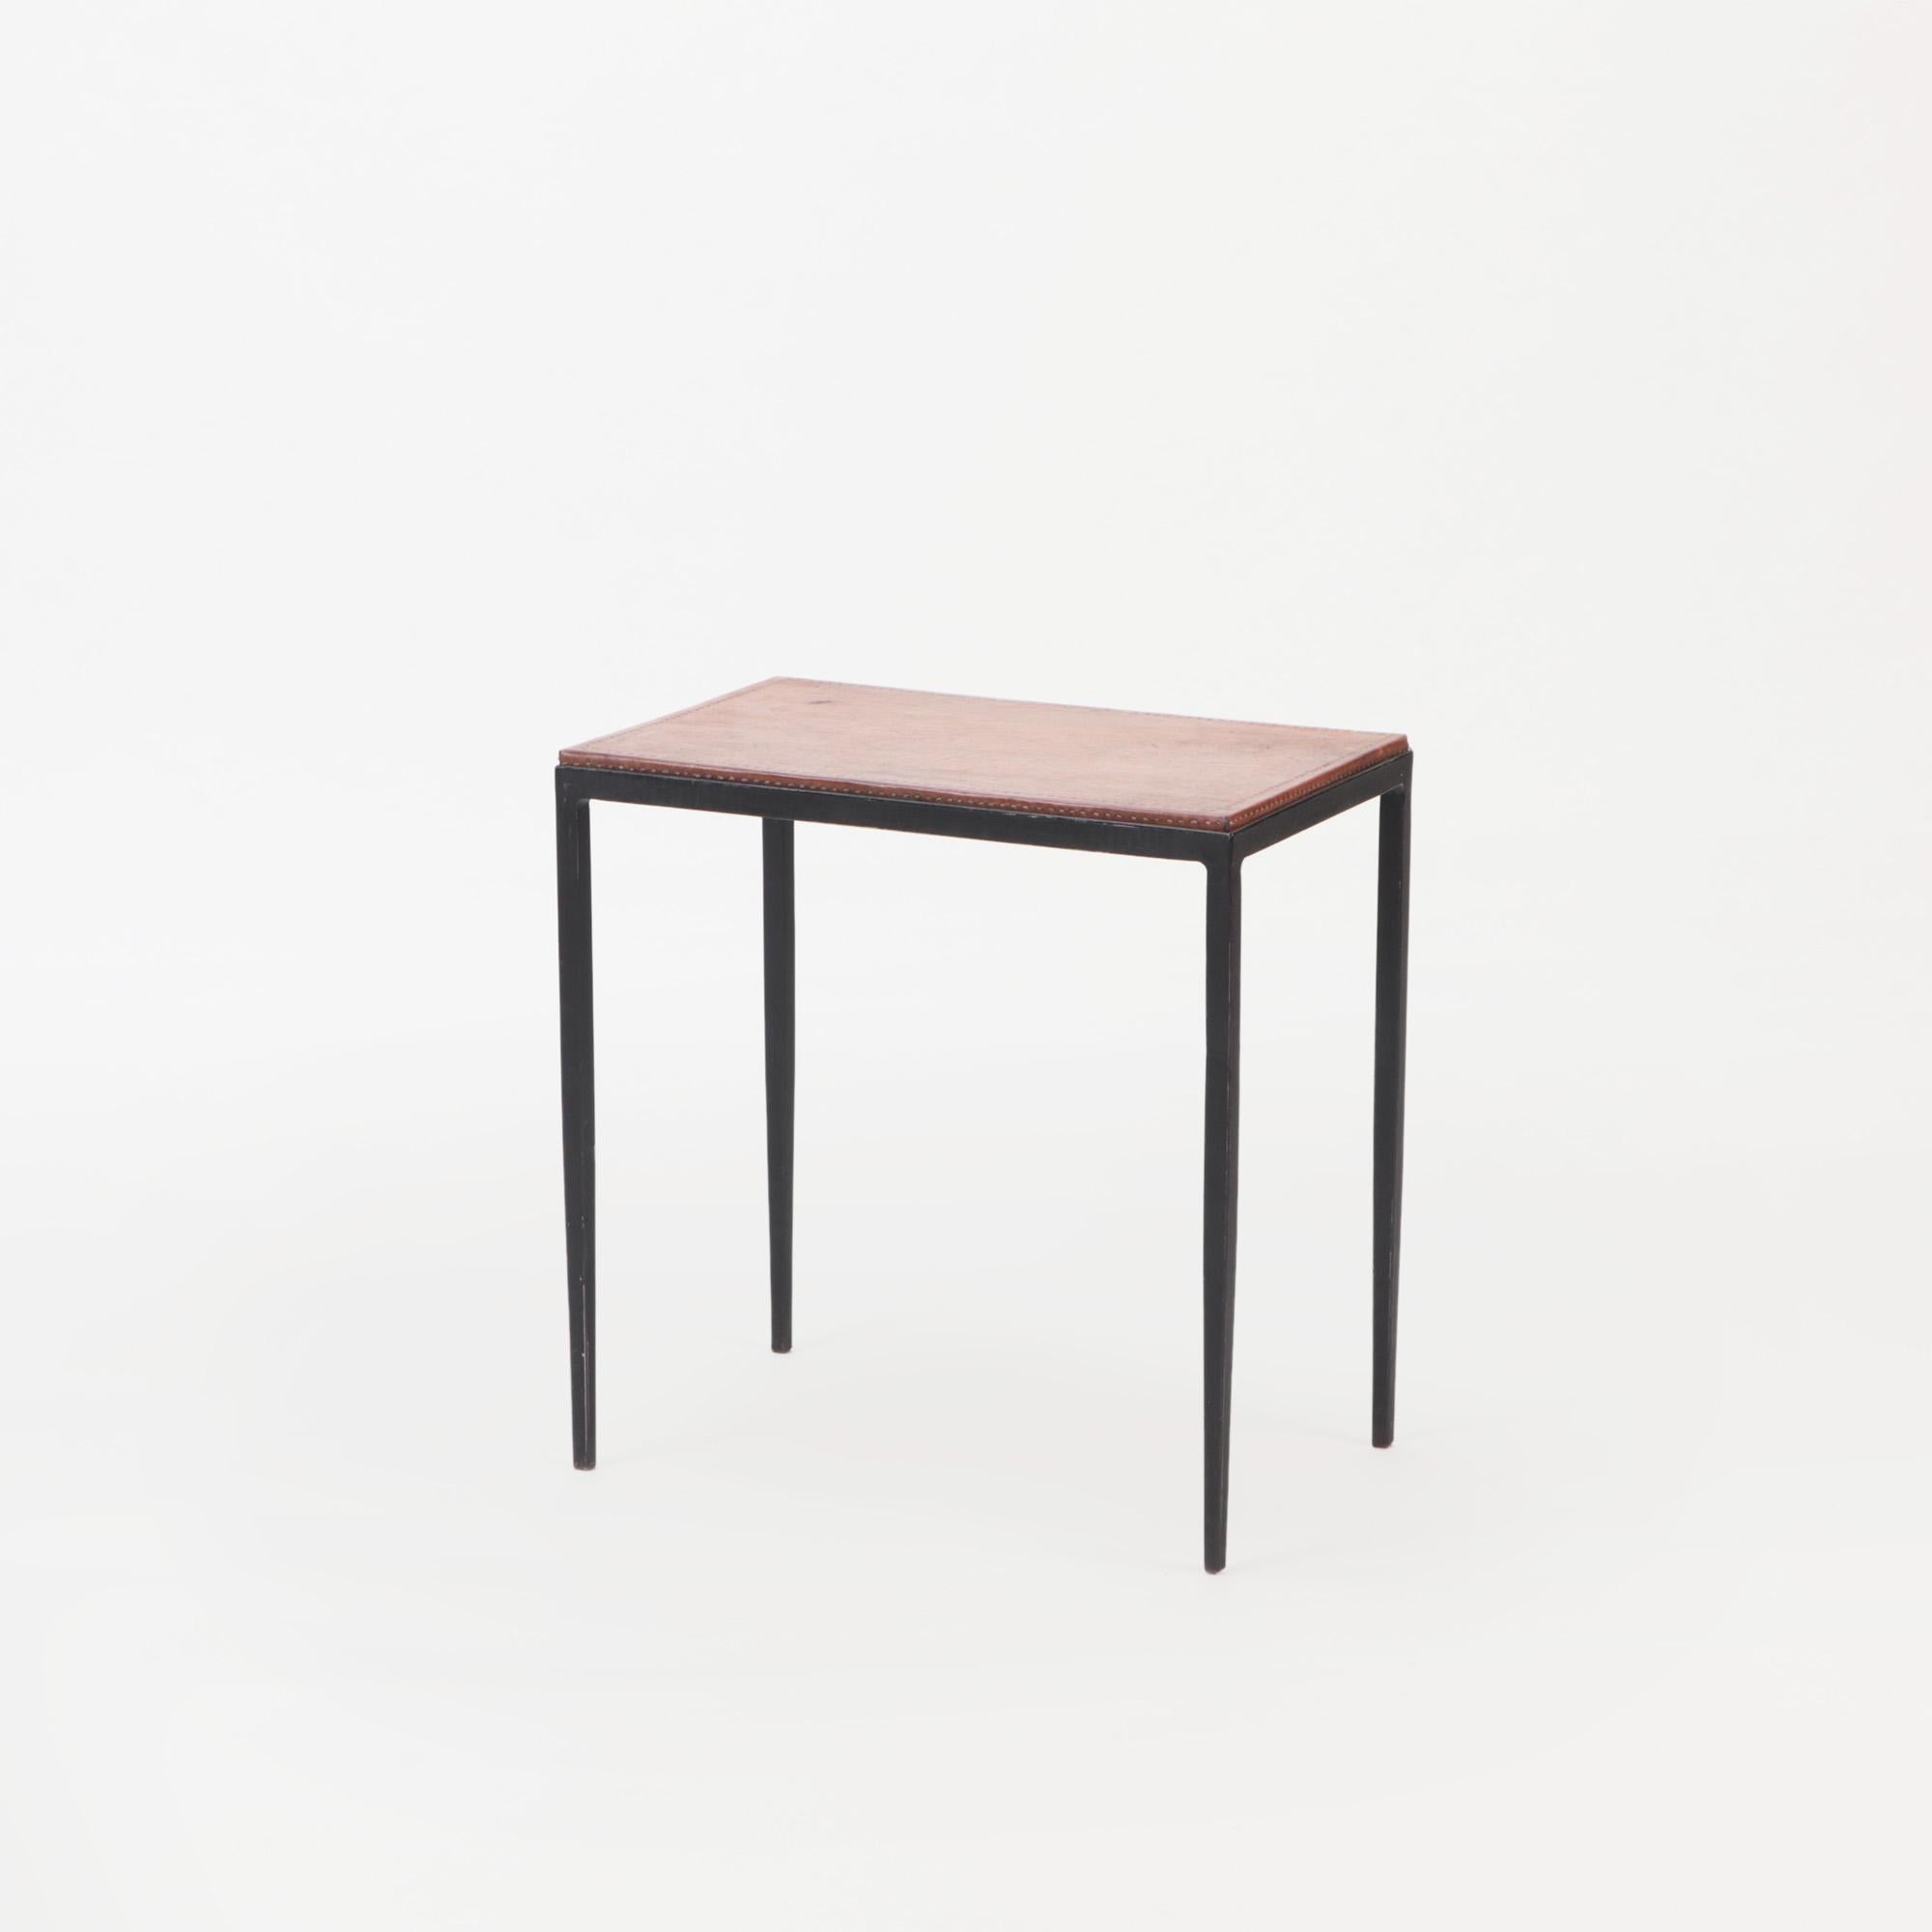 A pair of iron and leather tops small console tables or end tables. Contemporary. In the manner of Jean-Michel Frank.